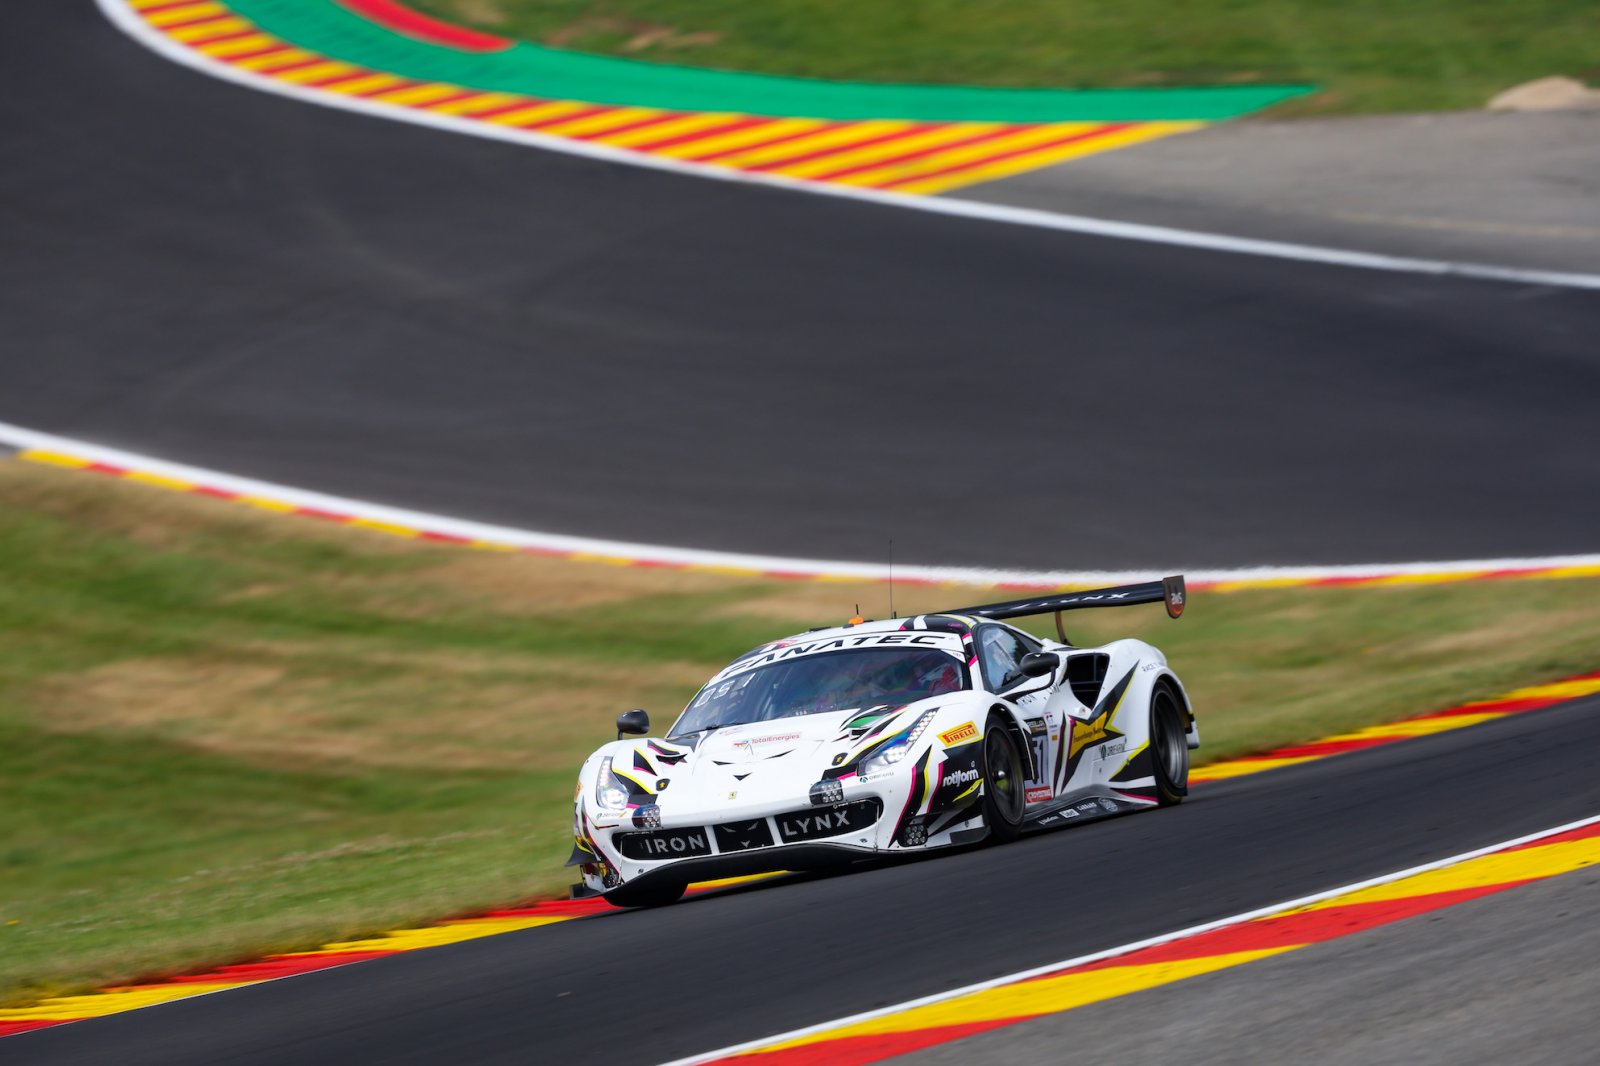 Iron Lynx Ferrari hits the front in pre-qualifying at Spa-Francorchamps